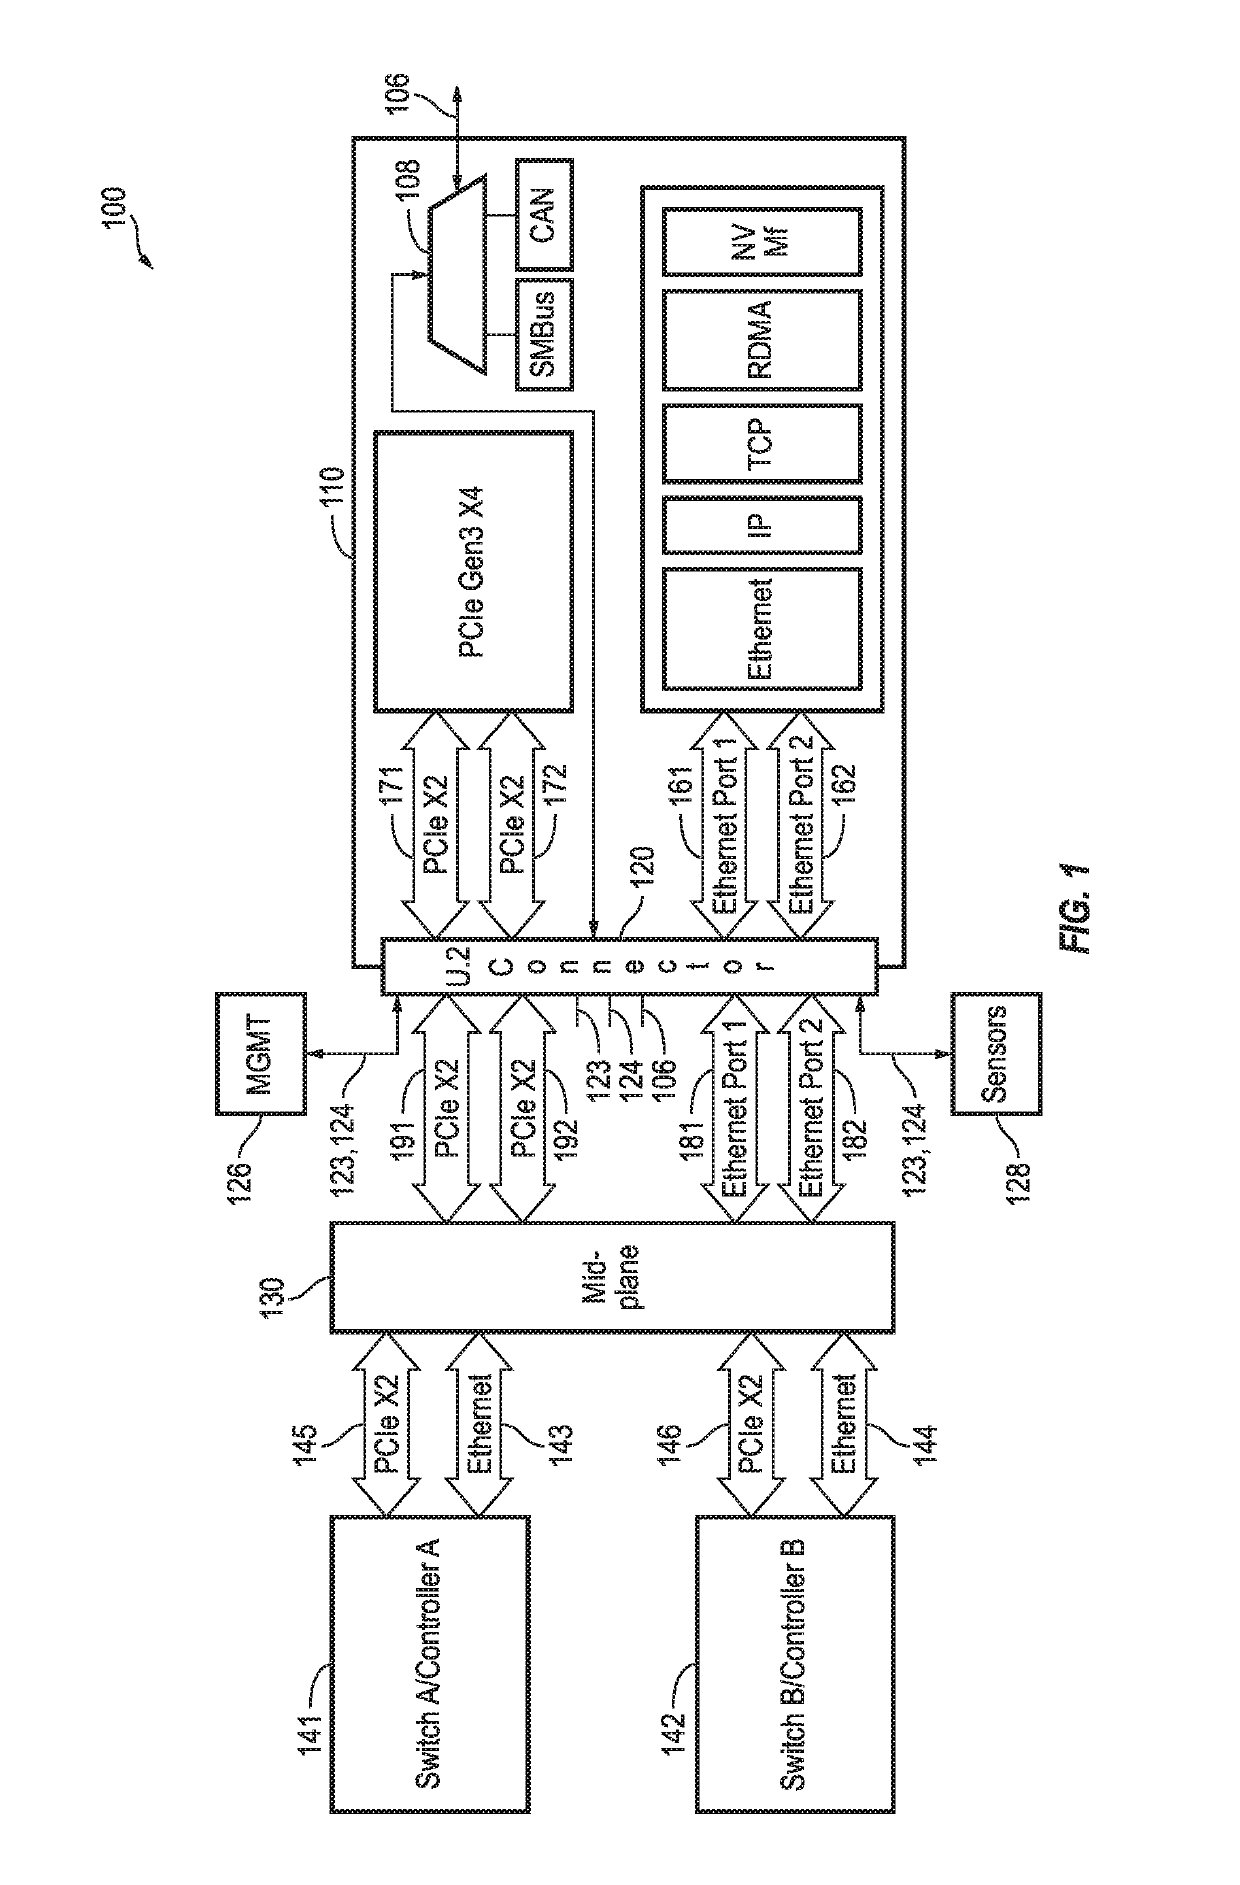 Multi-mode NVMe over fabrics device for supporting CAN (controller area network) bus or SMBus interface